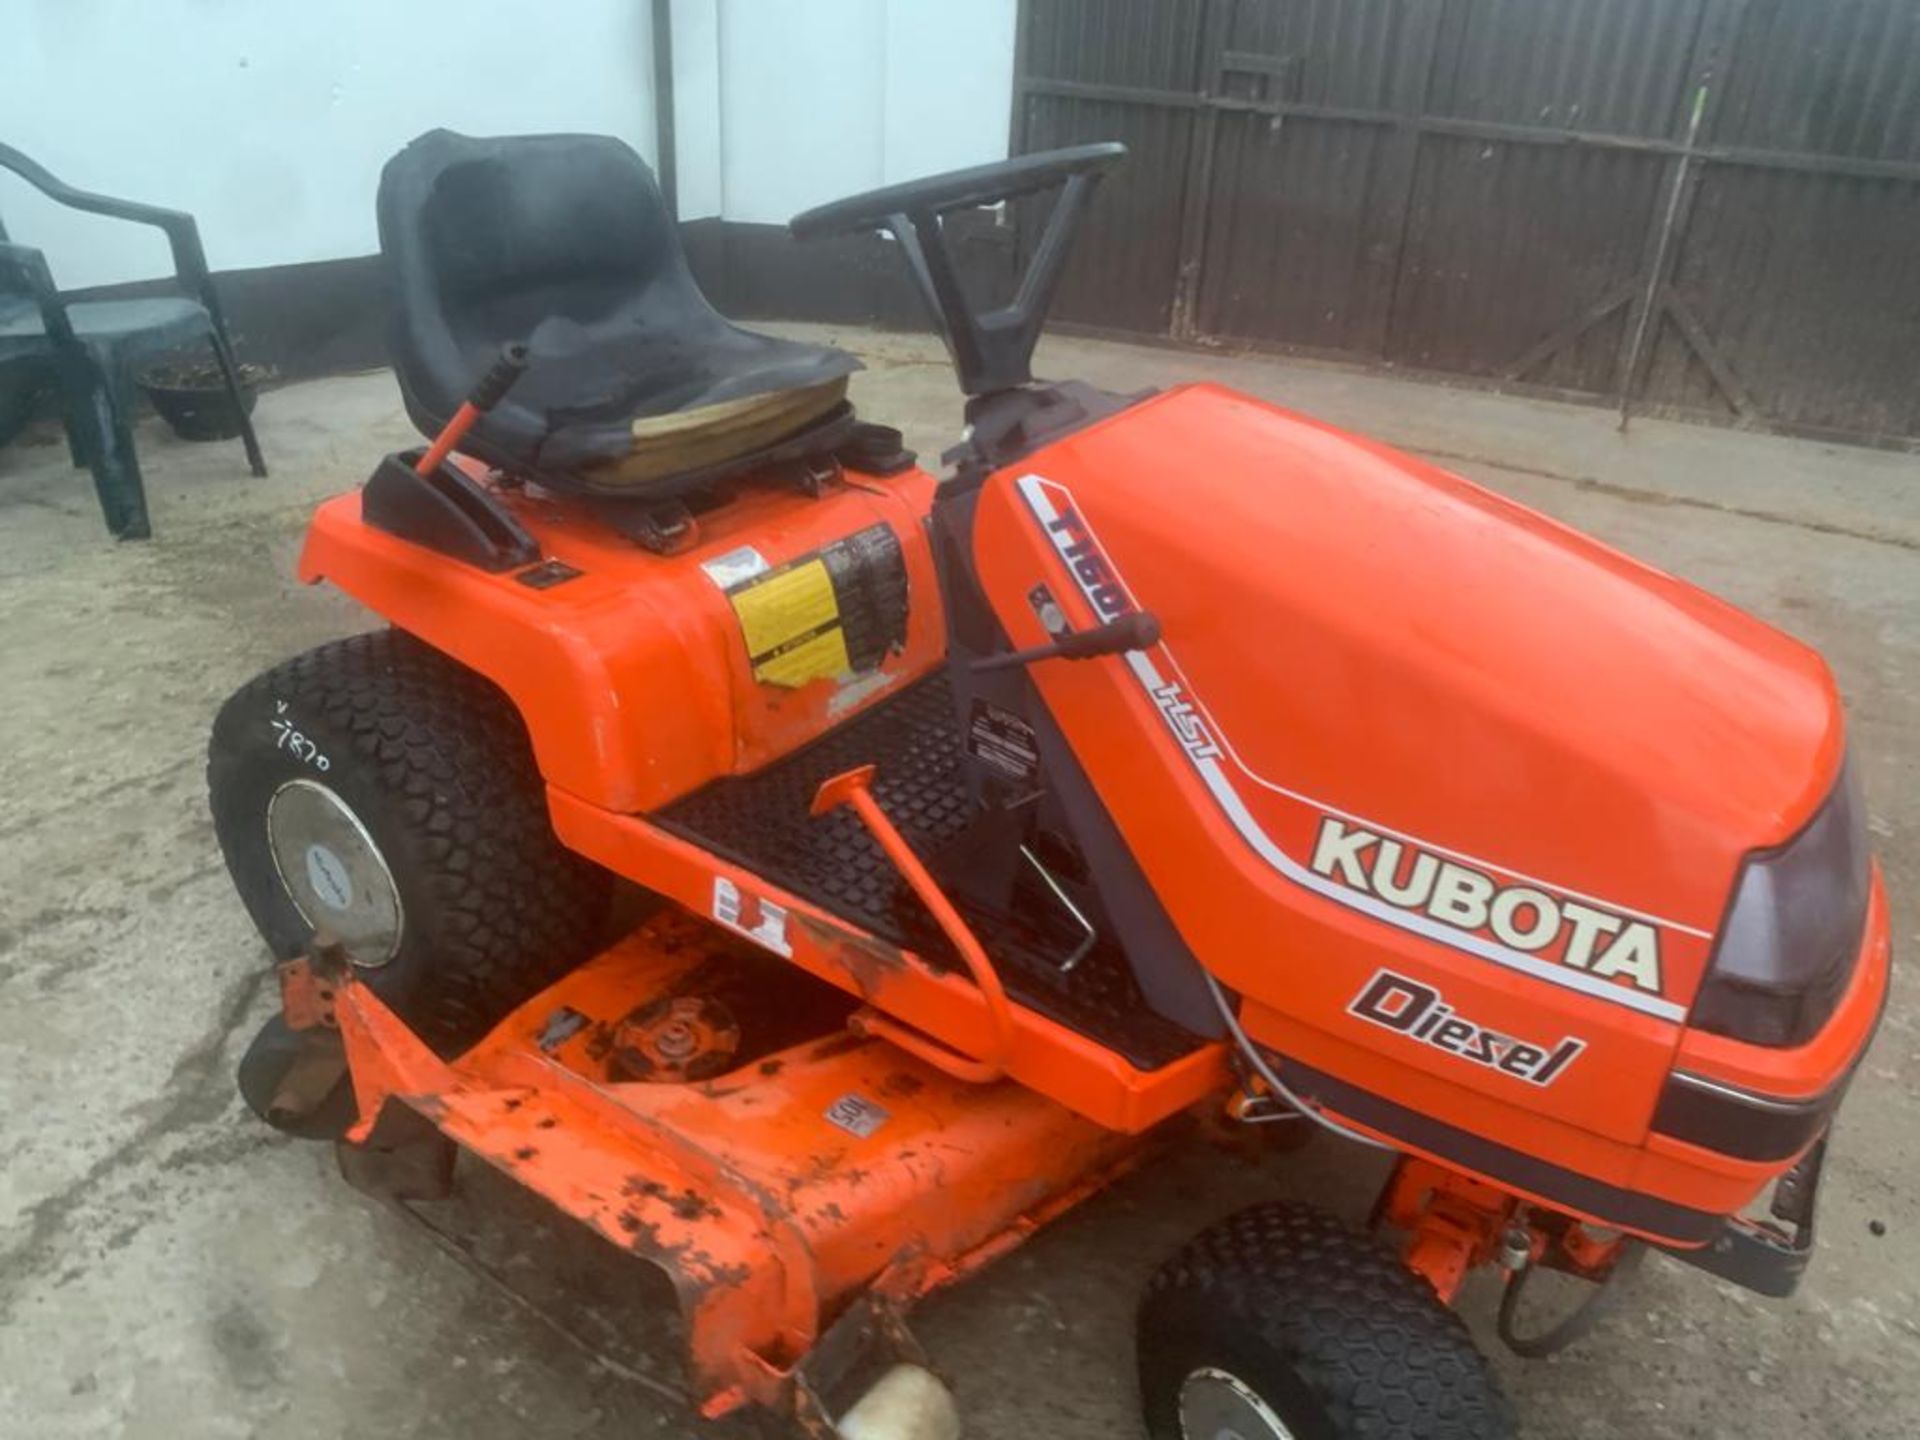 KUBOTA DIESEL RIDE ON MOWER, STRICTLY FOR PARTS ONLY, DELIVERY ANYWHERE UK £150 *PLUS VAT* - Image 7 of 7